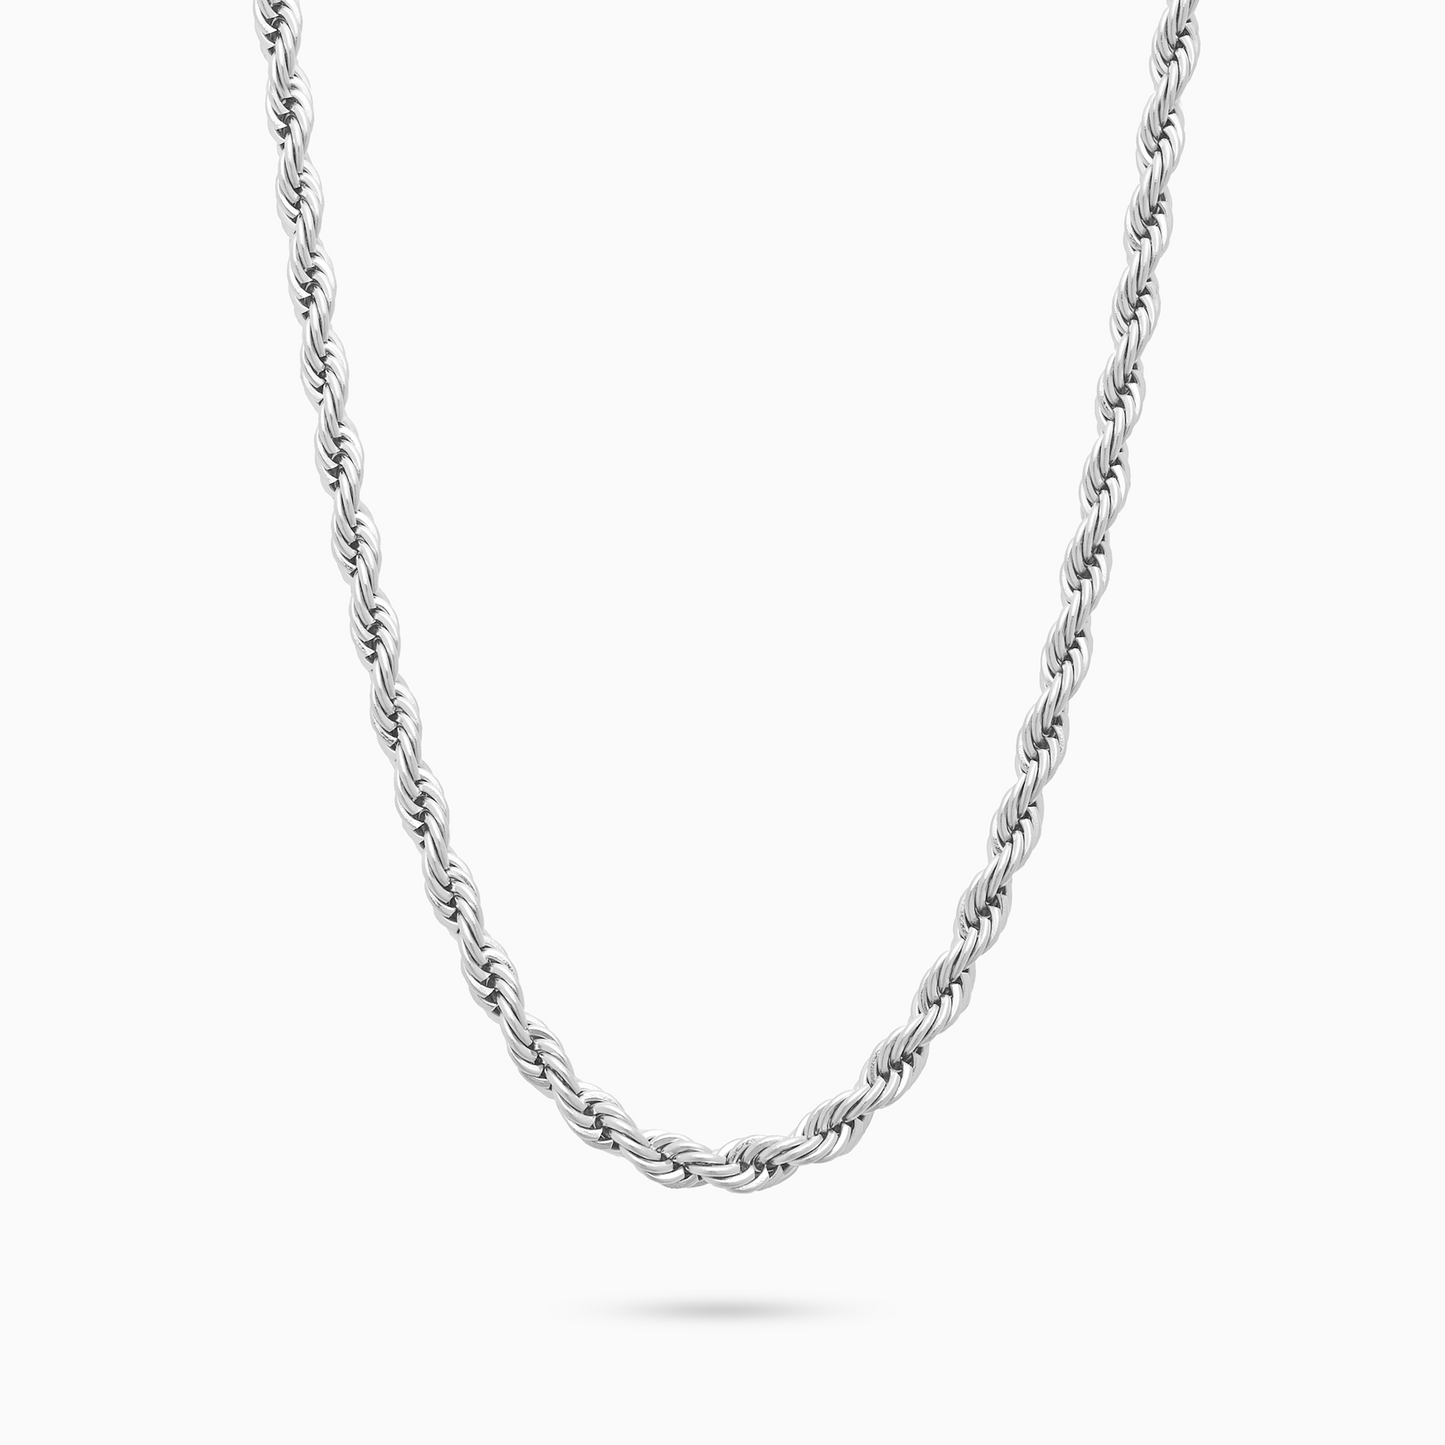 Rope chain 4 mm